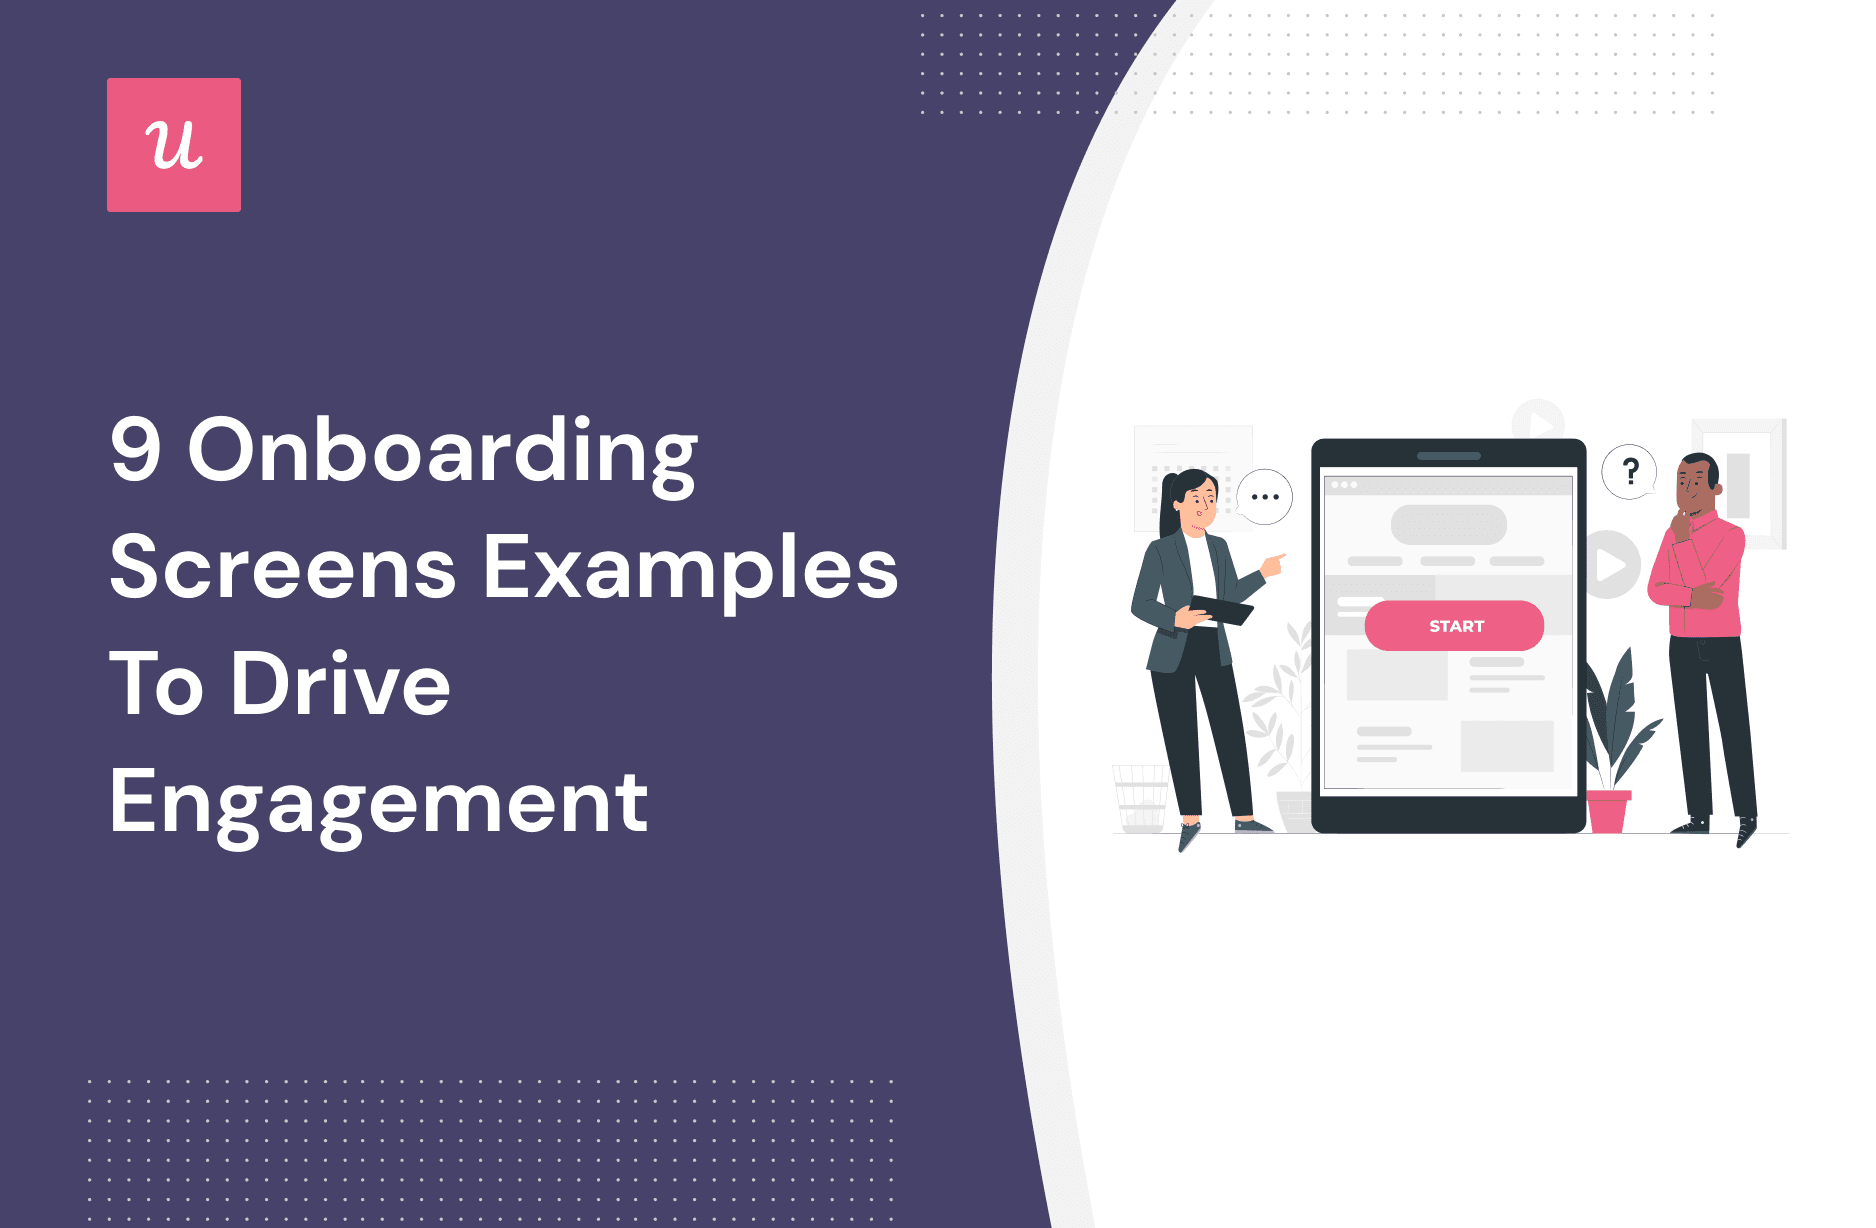 9 Onboarding Screens Examples to Drive Engagement cover